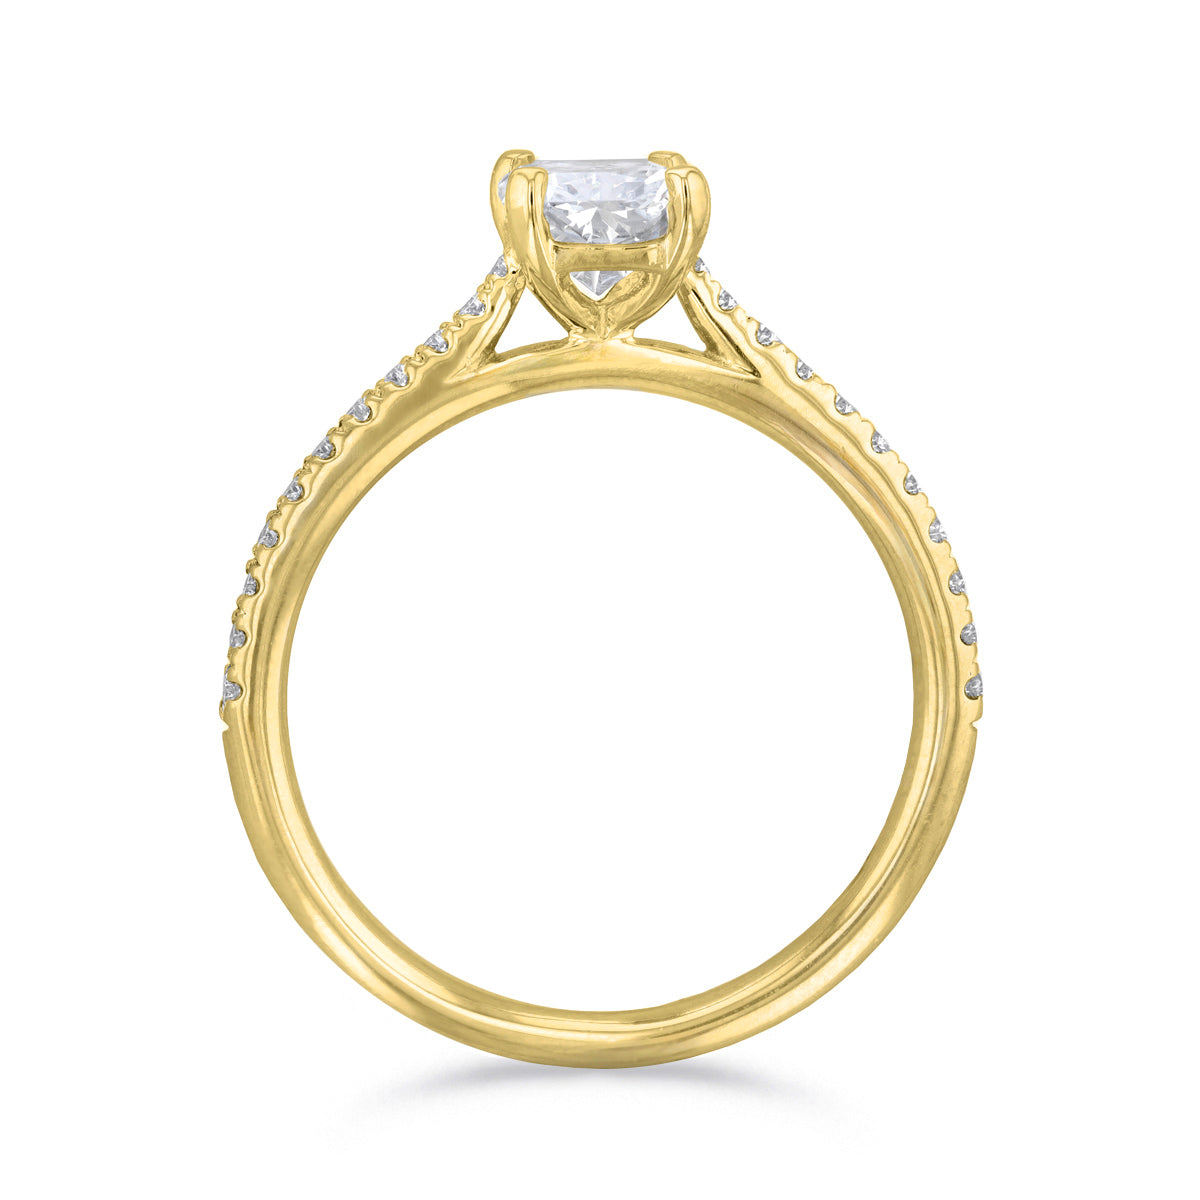 1-50ct-ophelia-shoulder-set-radiant-cut-solitaire-diamond-engagement-ring-18ct-yellow-gold